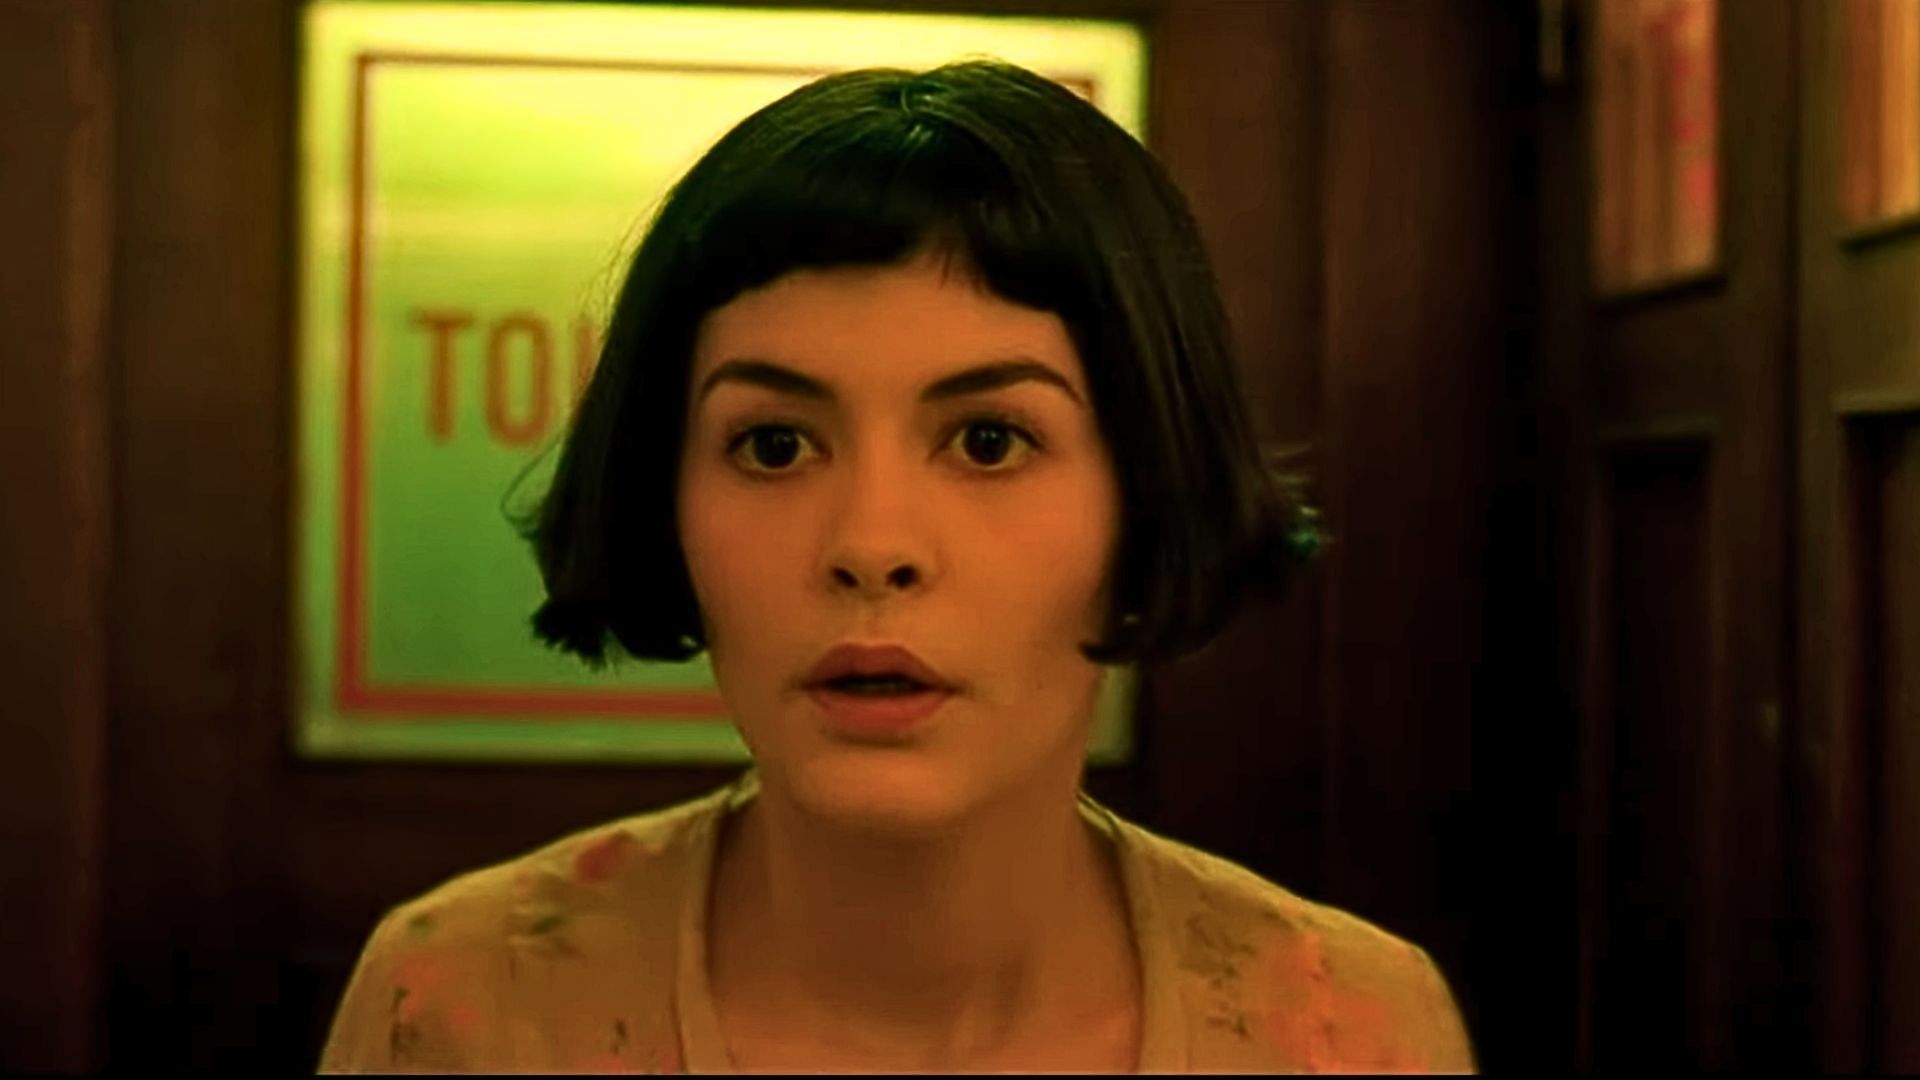 Am&eacute;lie is portrayed by Audrey Tautou (Image via YouTube/Sony Pictures Classics)